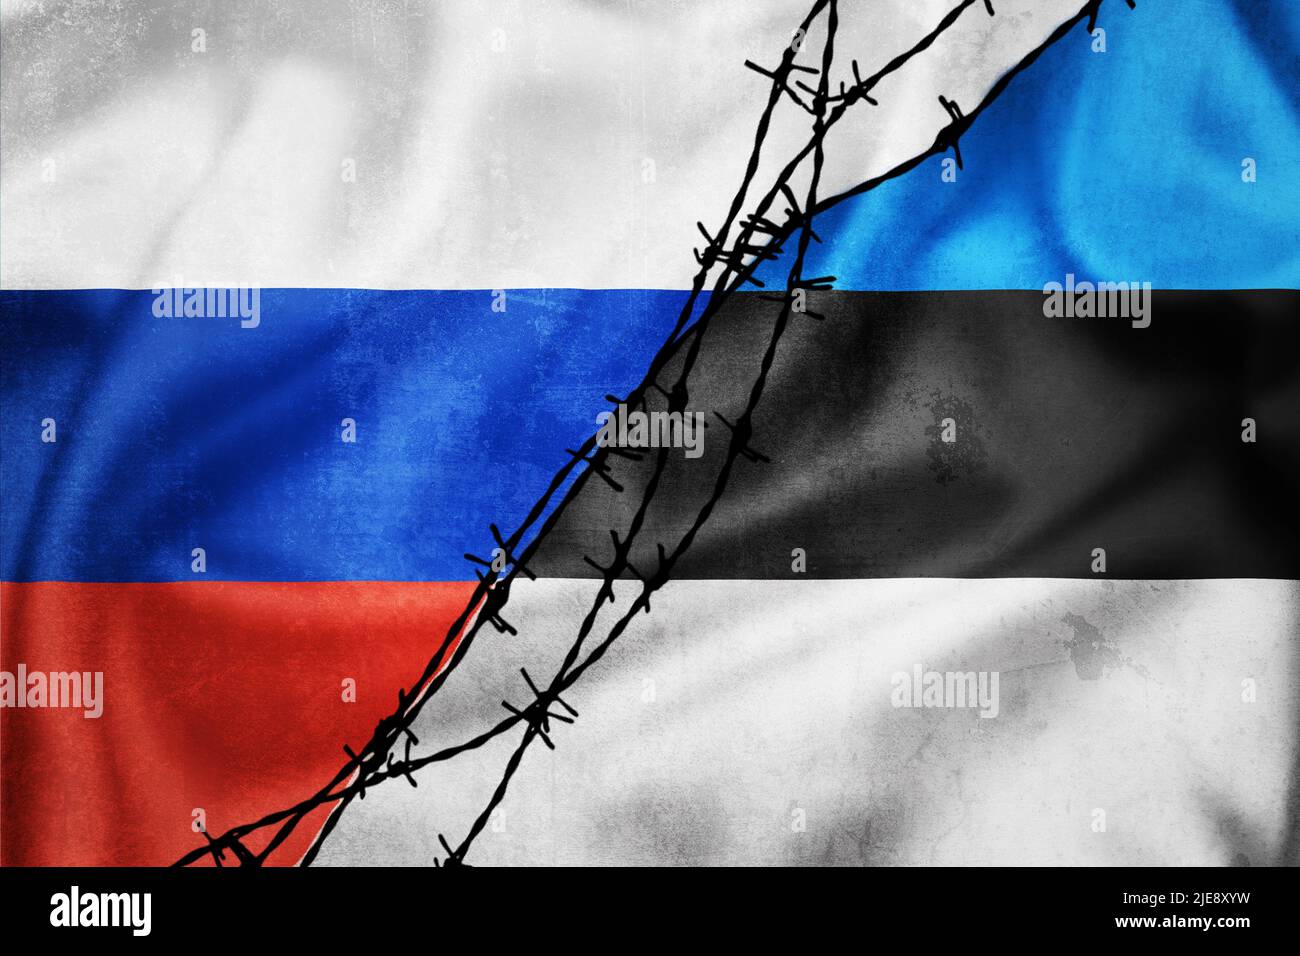 Grunge flags of Russian Federation and Estonia divided by barb wire illustration, concept of tense relations between west and Russia Stock Photo